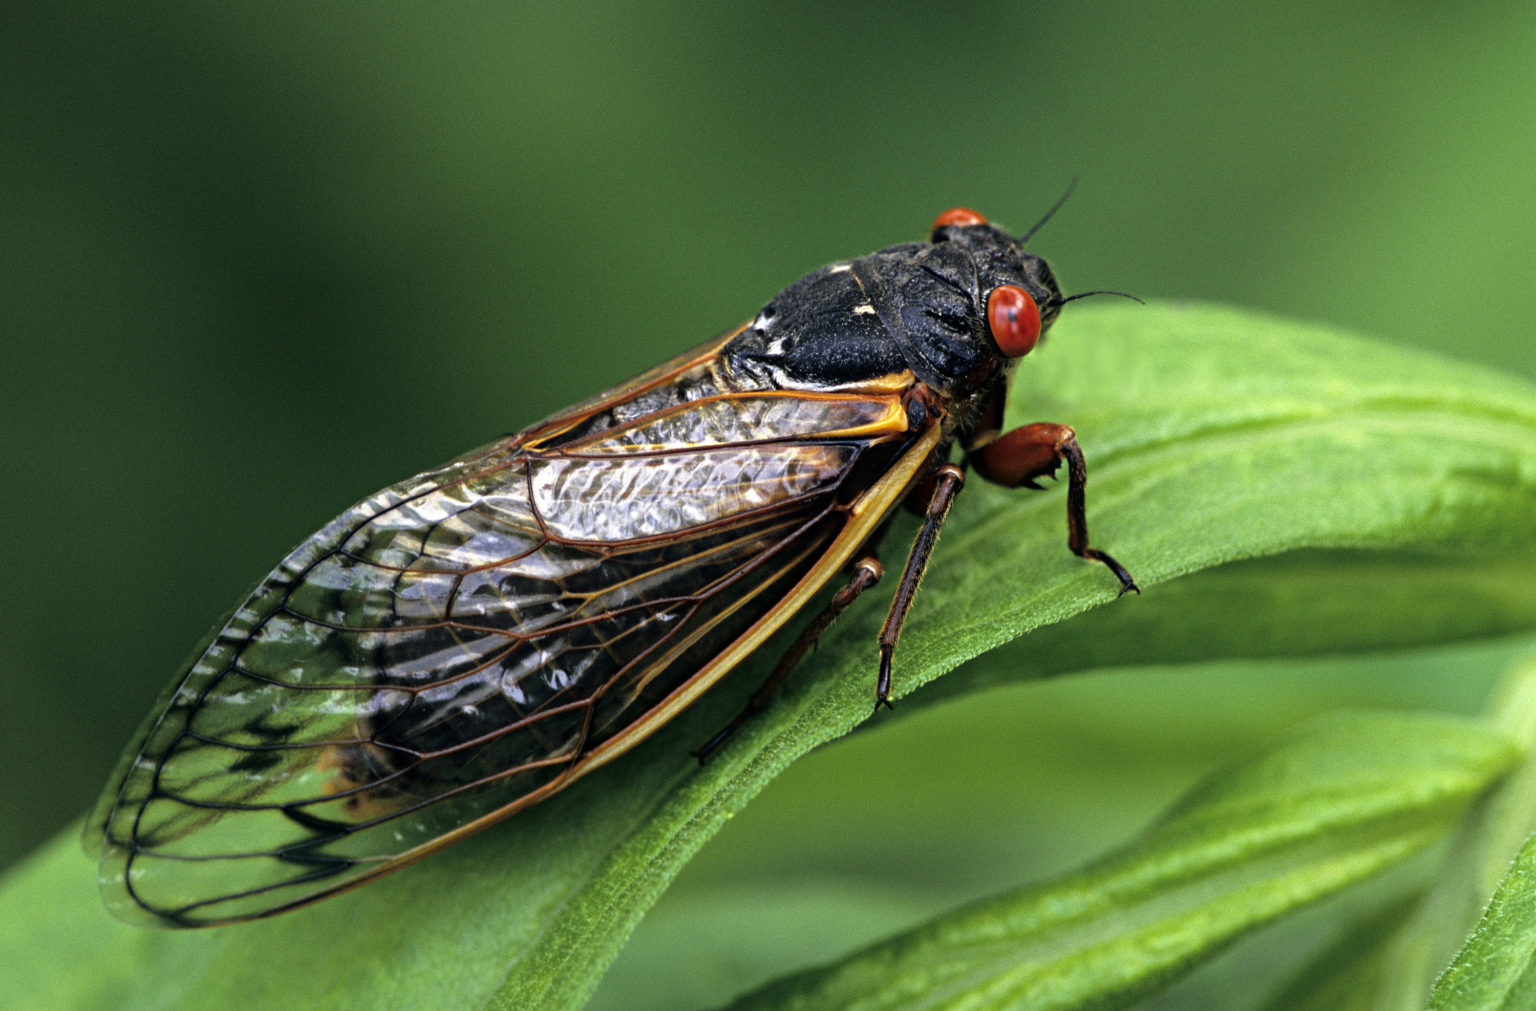 Periodical Cicada, Adult, Magicicada spp. Requires 17 years to complete